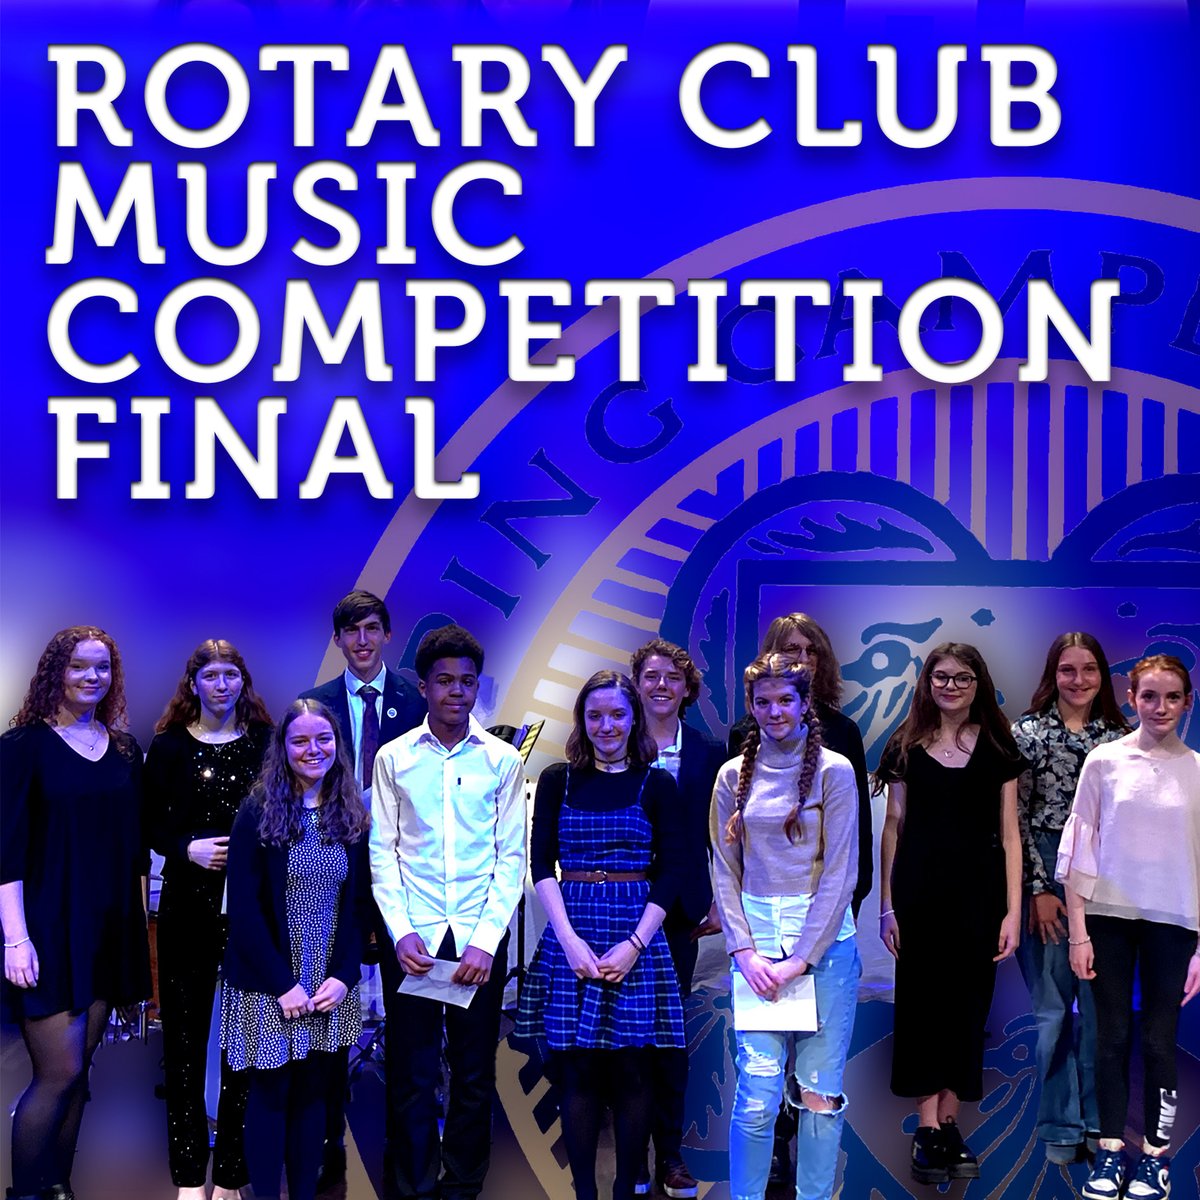 What a night! Yesterday's Young Musician Grand Final, organized by The Rotary Club & Music Department, showcased exceptional talents. Our young musicians delivered outstanding performances, leaving the audience in awe. Congratulations to all participants! #YoungMusicians #Music